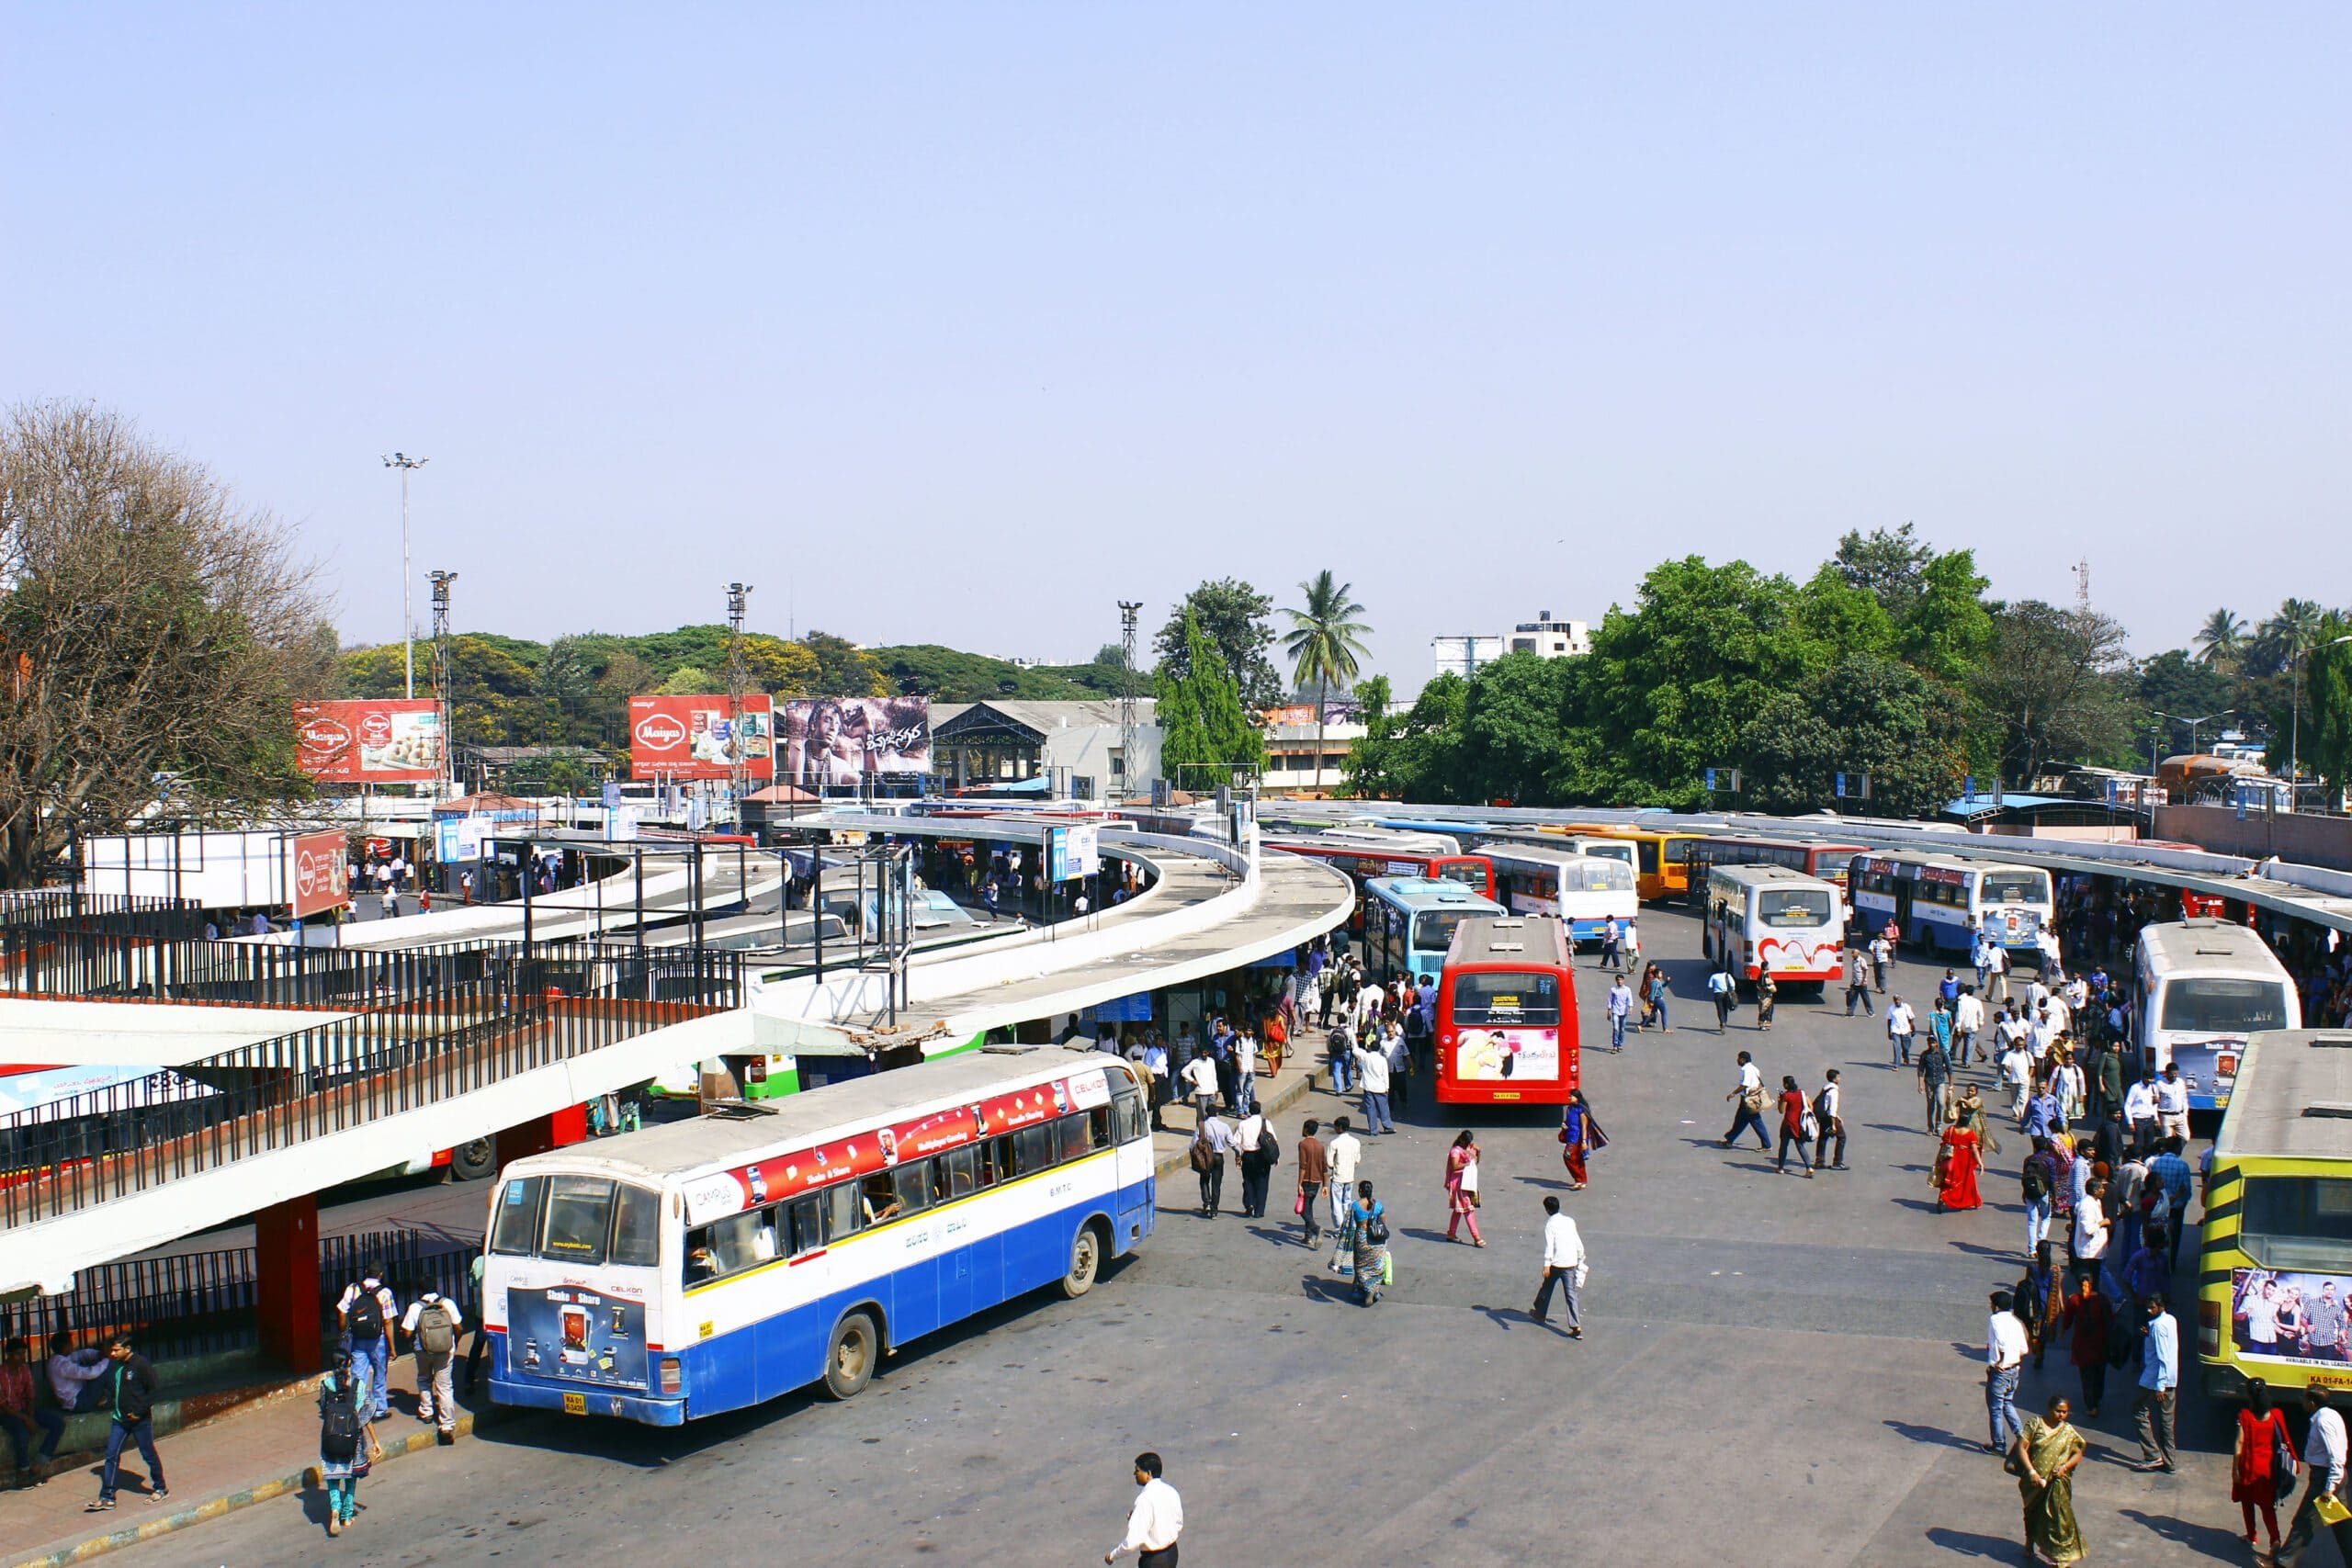 The incident occurred even as the Karnataka government has been encouraging women to use public transport buses. (Creative Commons)